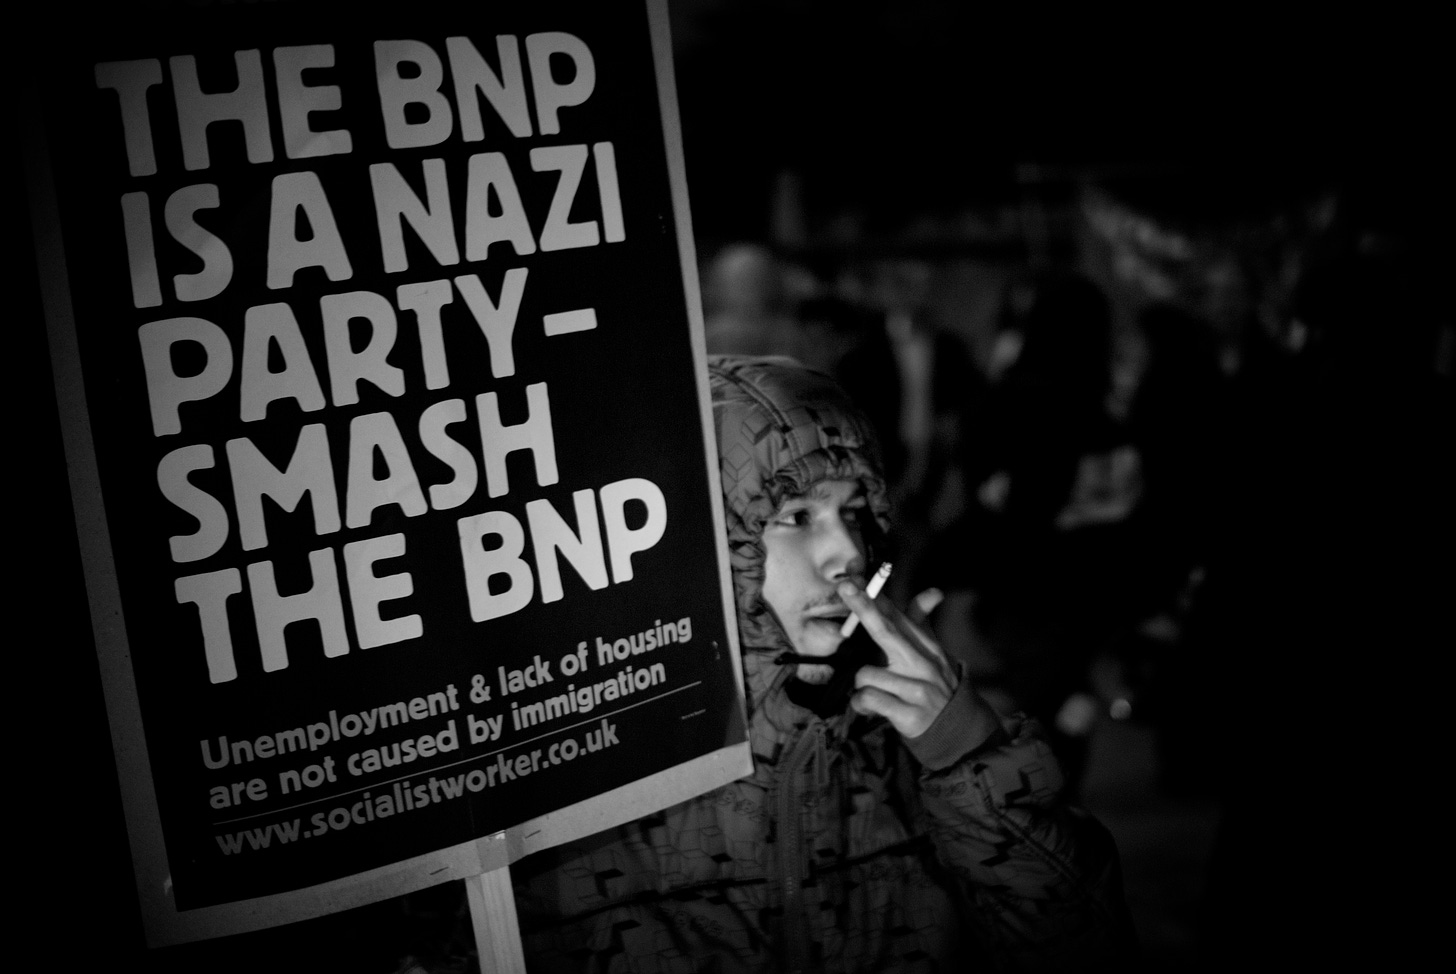 Man with anti-BNP sign. CC-BY-licensed photo by Andy Armstrong at https://www.flickr.com/photos/95236086@N00/4035014763